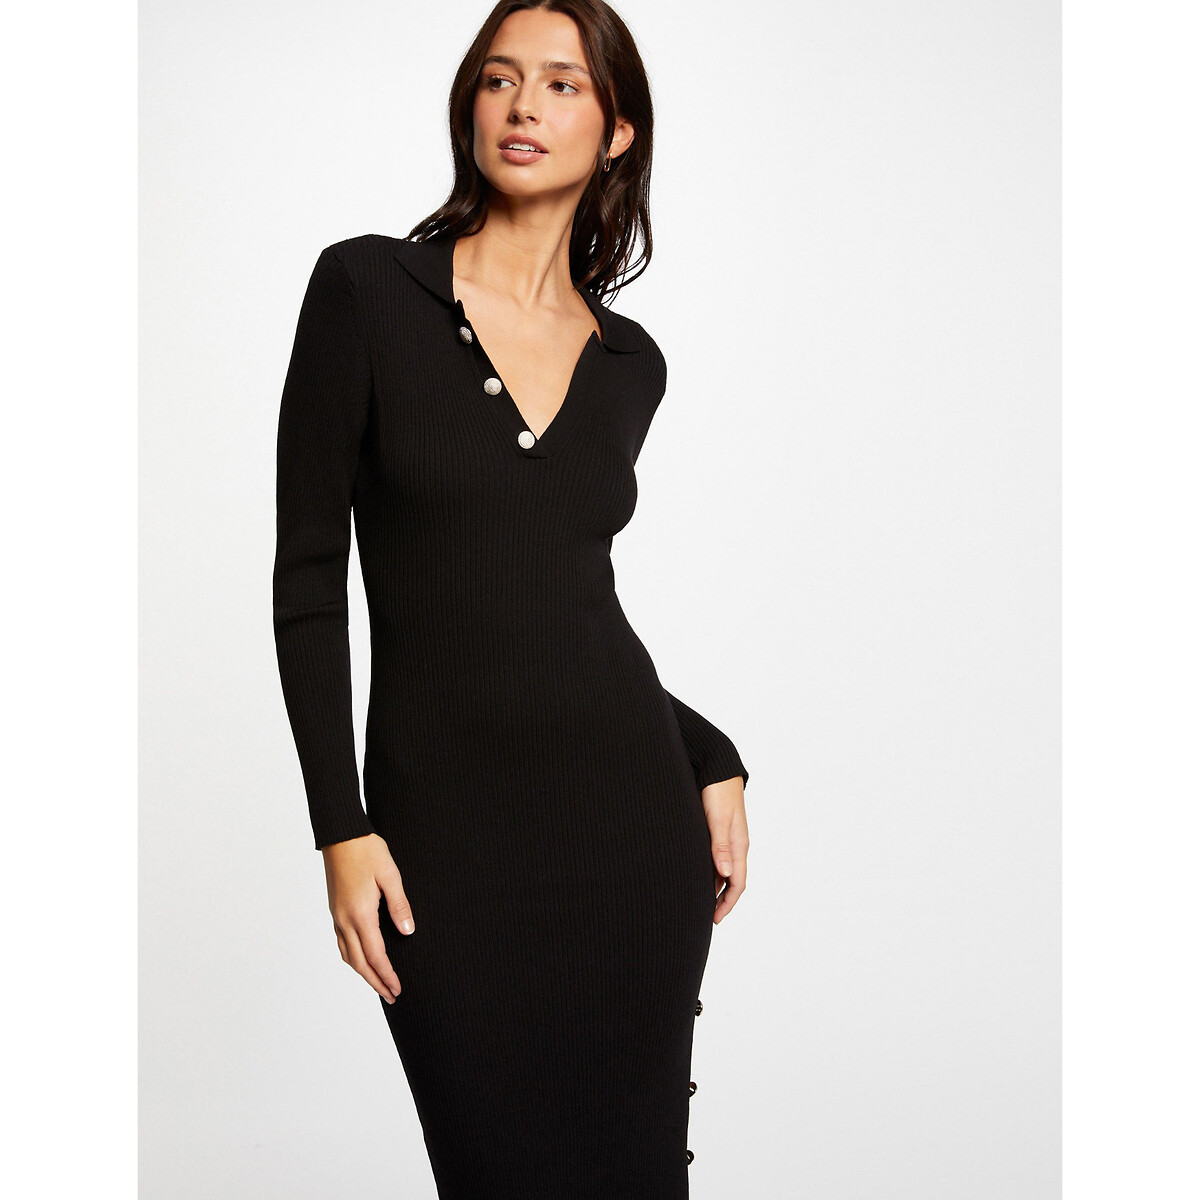 Bodycon Jumper Dress with Split, Button Trim and Long Sleeves